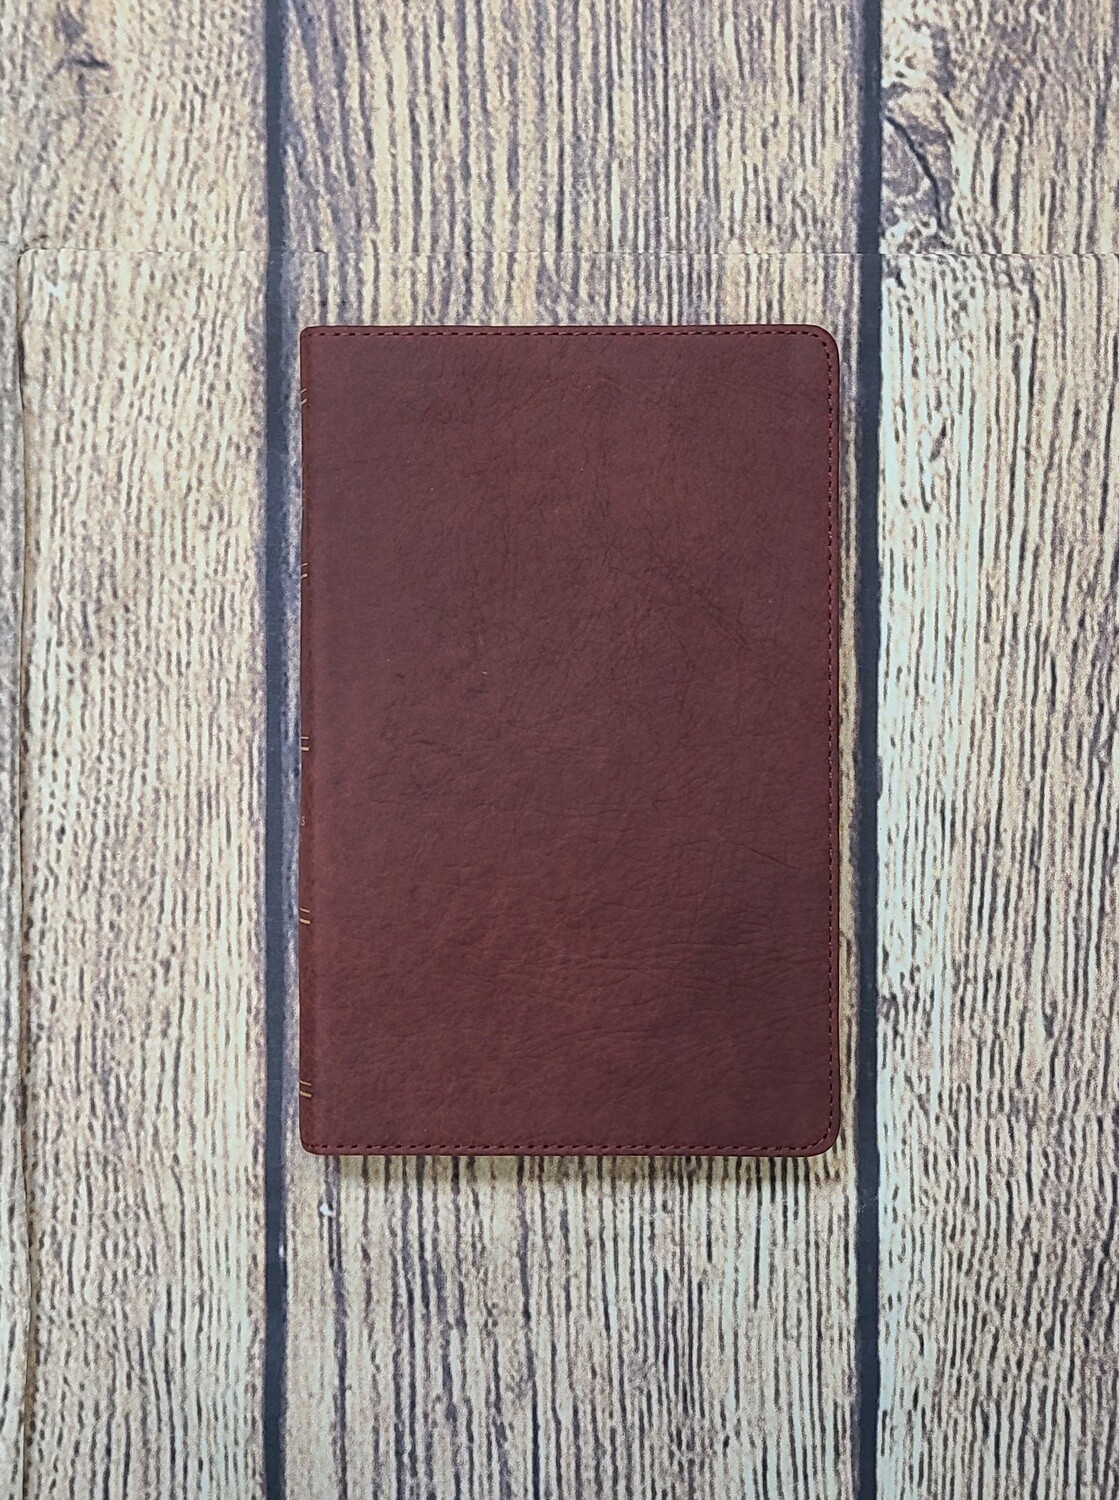 Burgundy Premium Leather KJV Gift Bible with Thumb Indexing